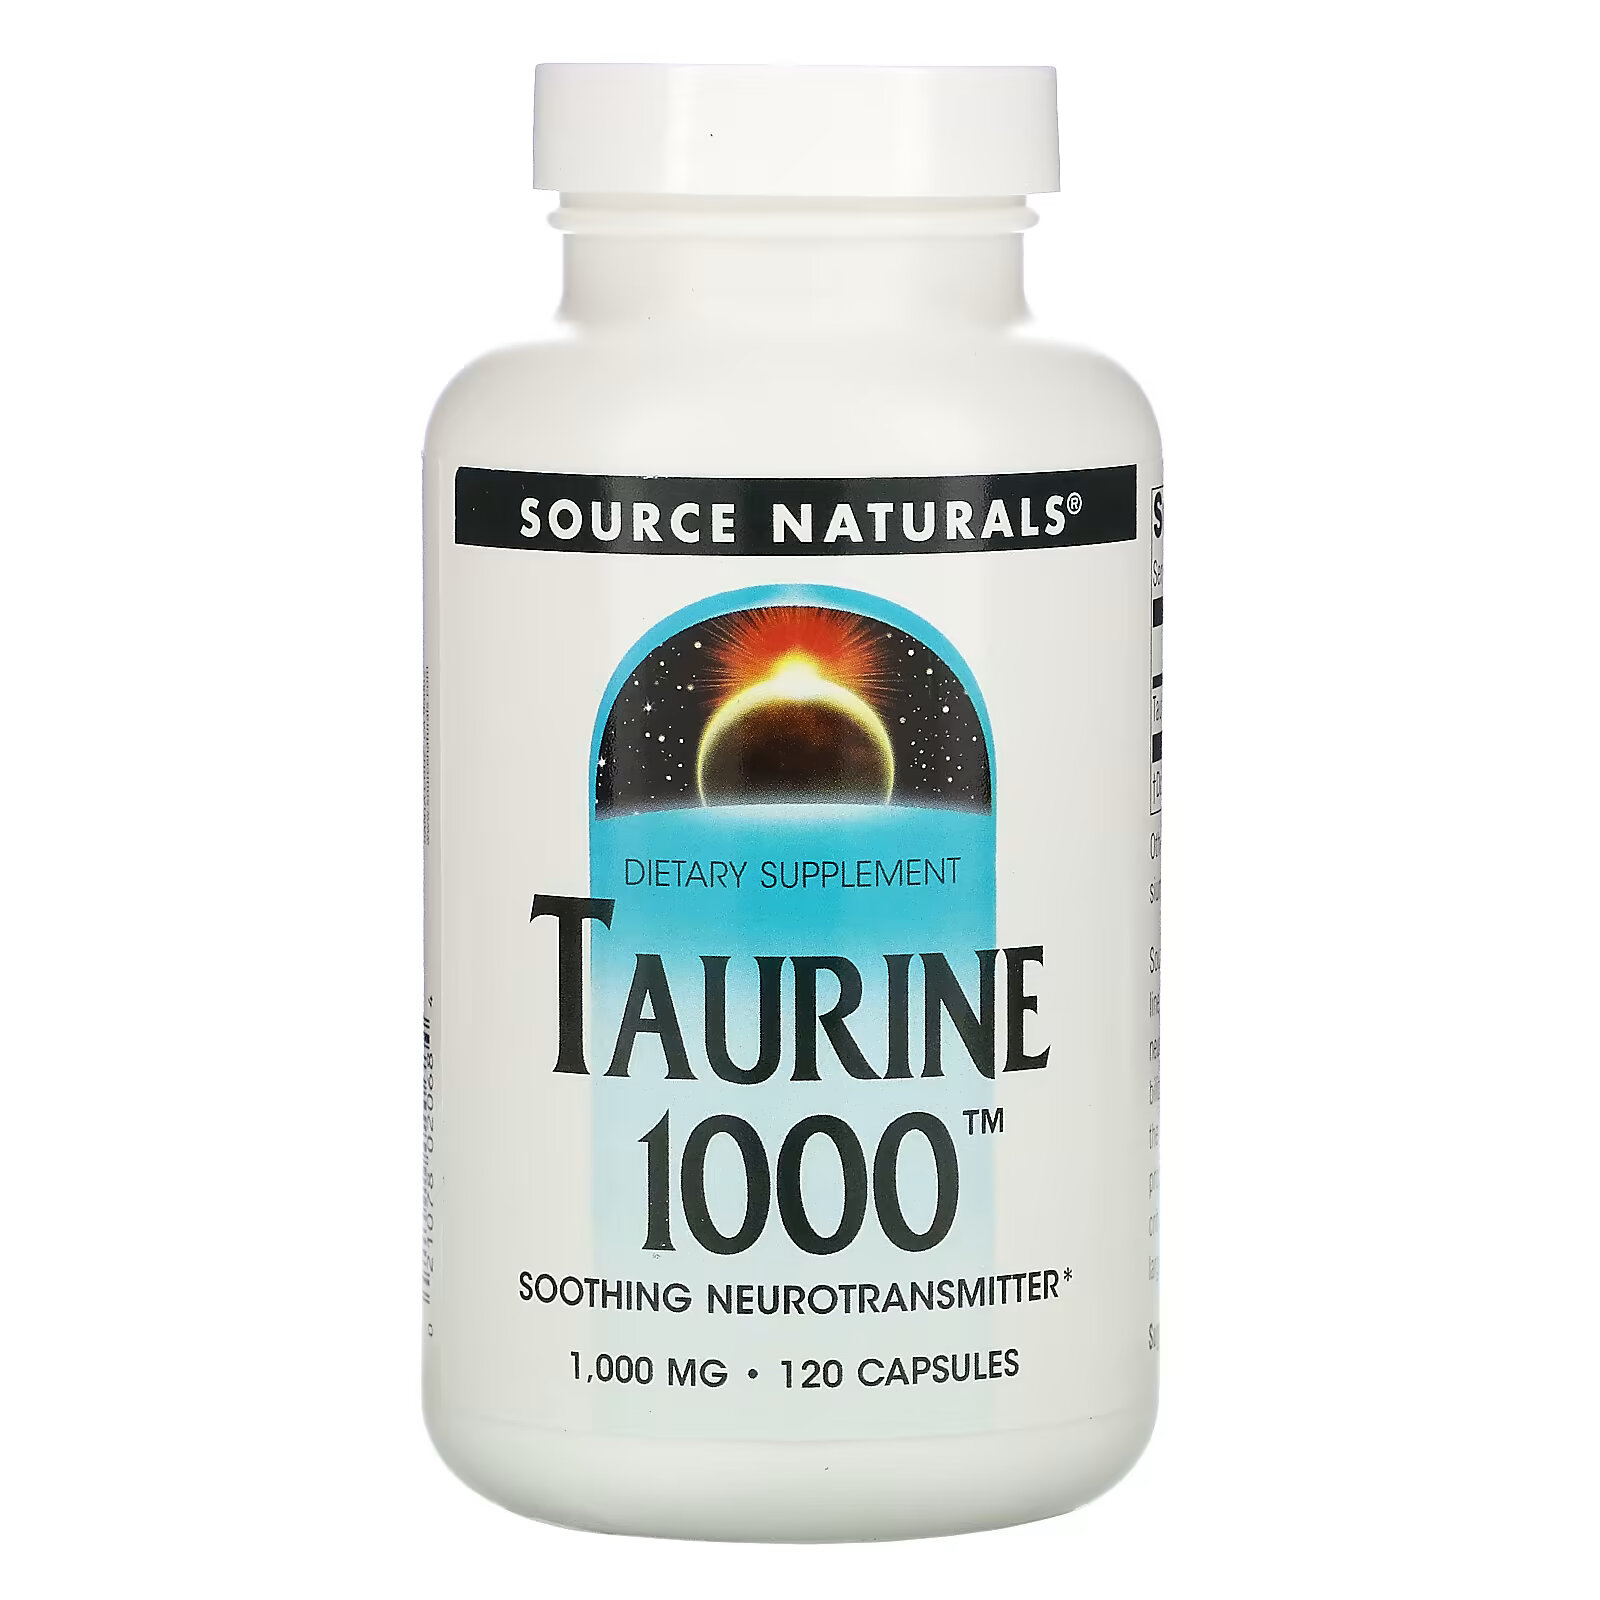 source naturals 5 htp 100 мг 120 капсул Source Naturals, таурин, 1000 мг, 120 капсул